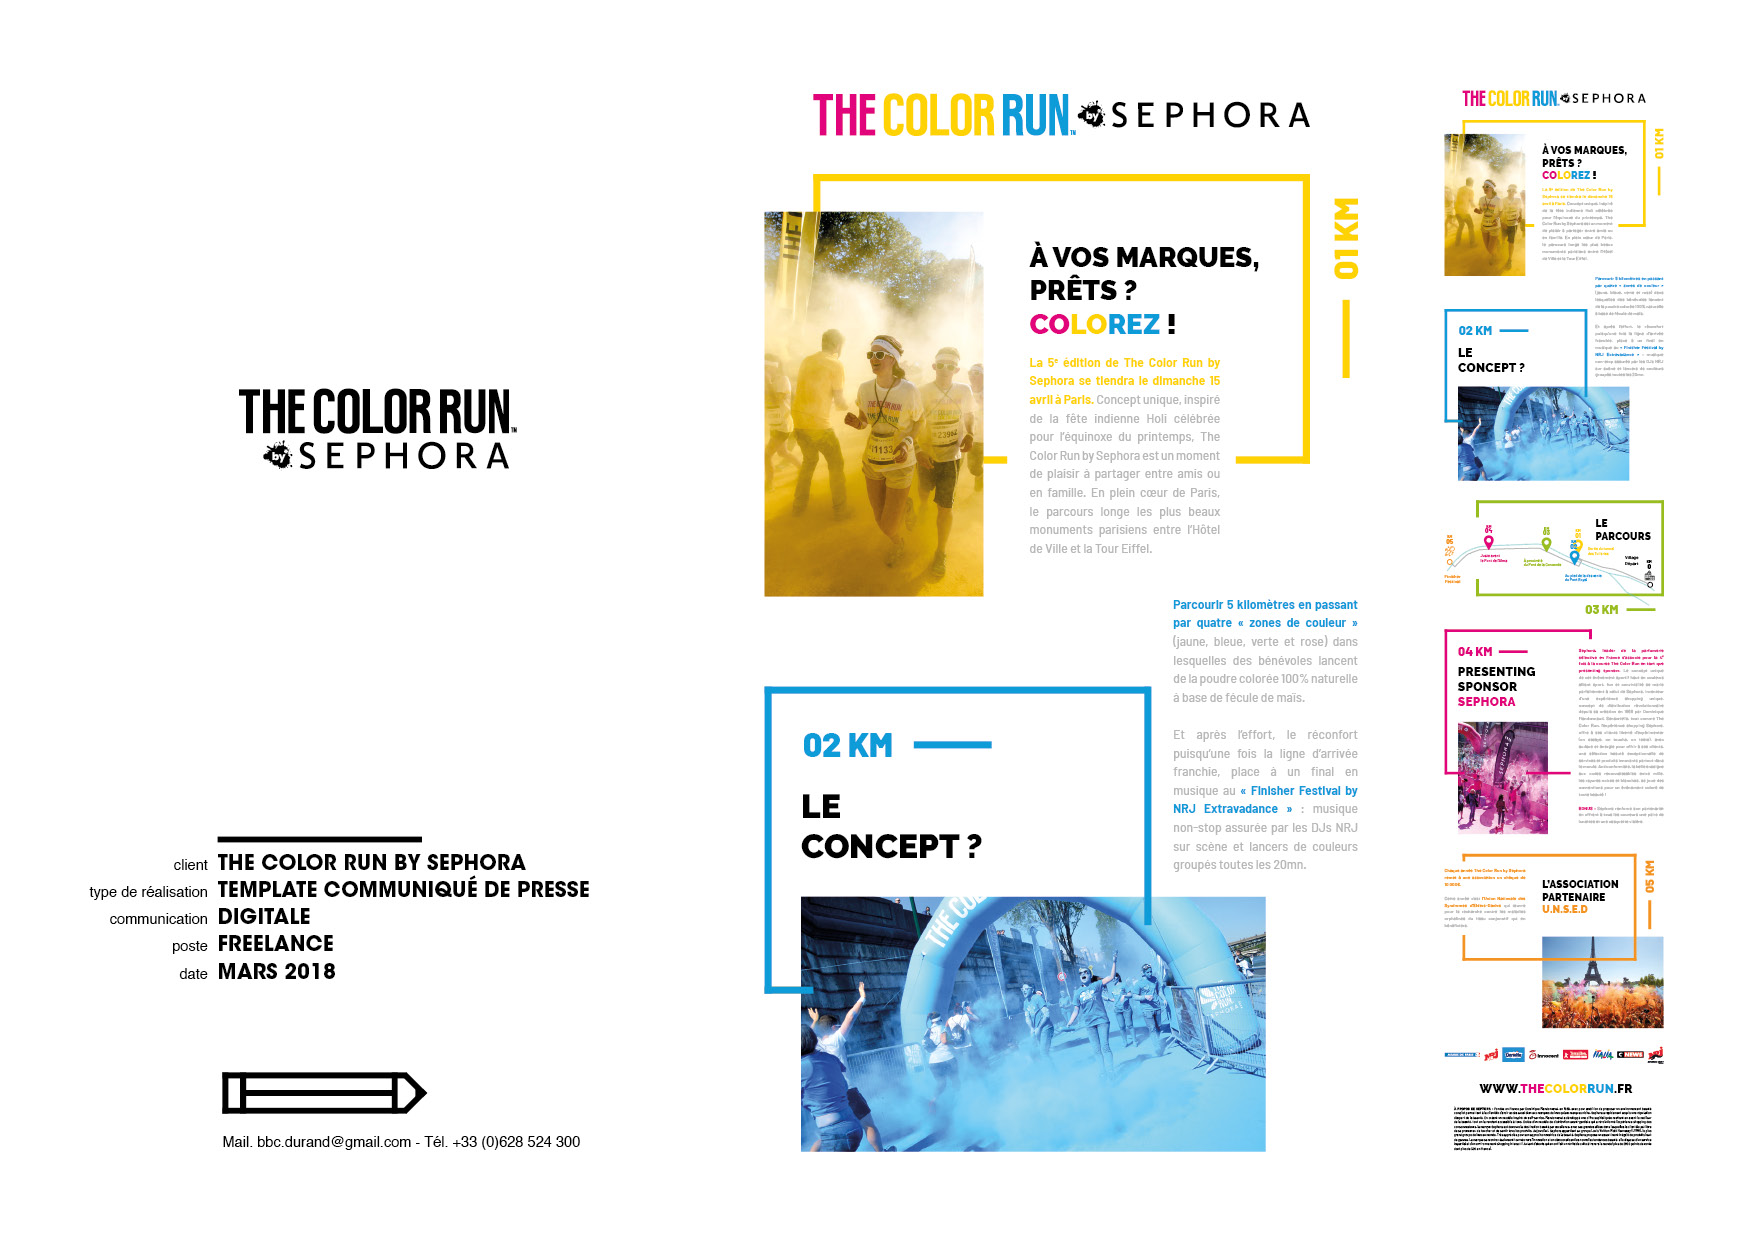 The Color Run by Sephora - communication digitale